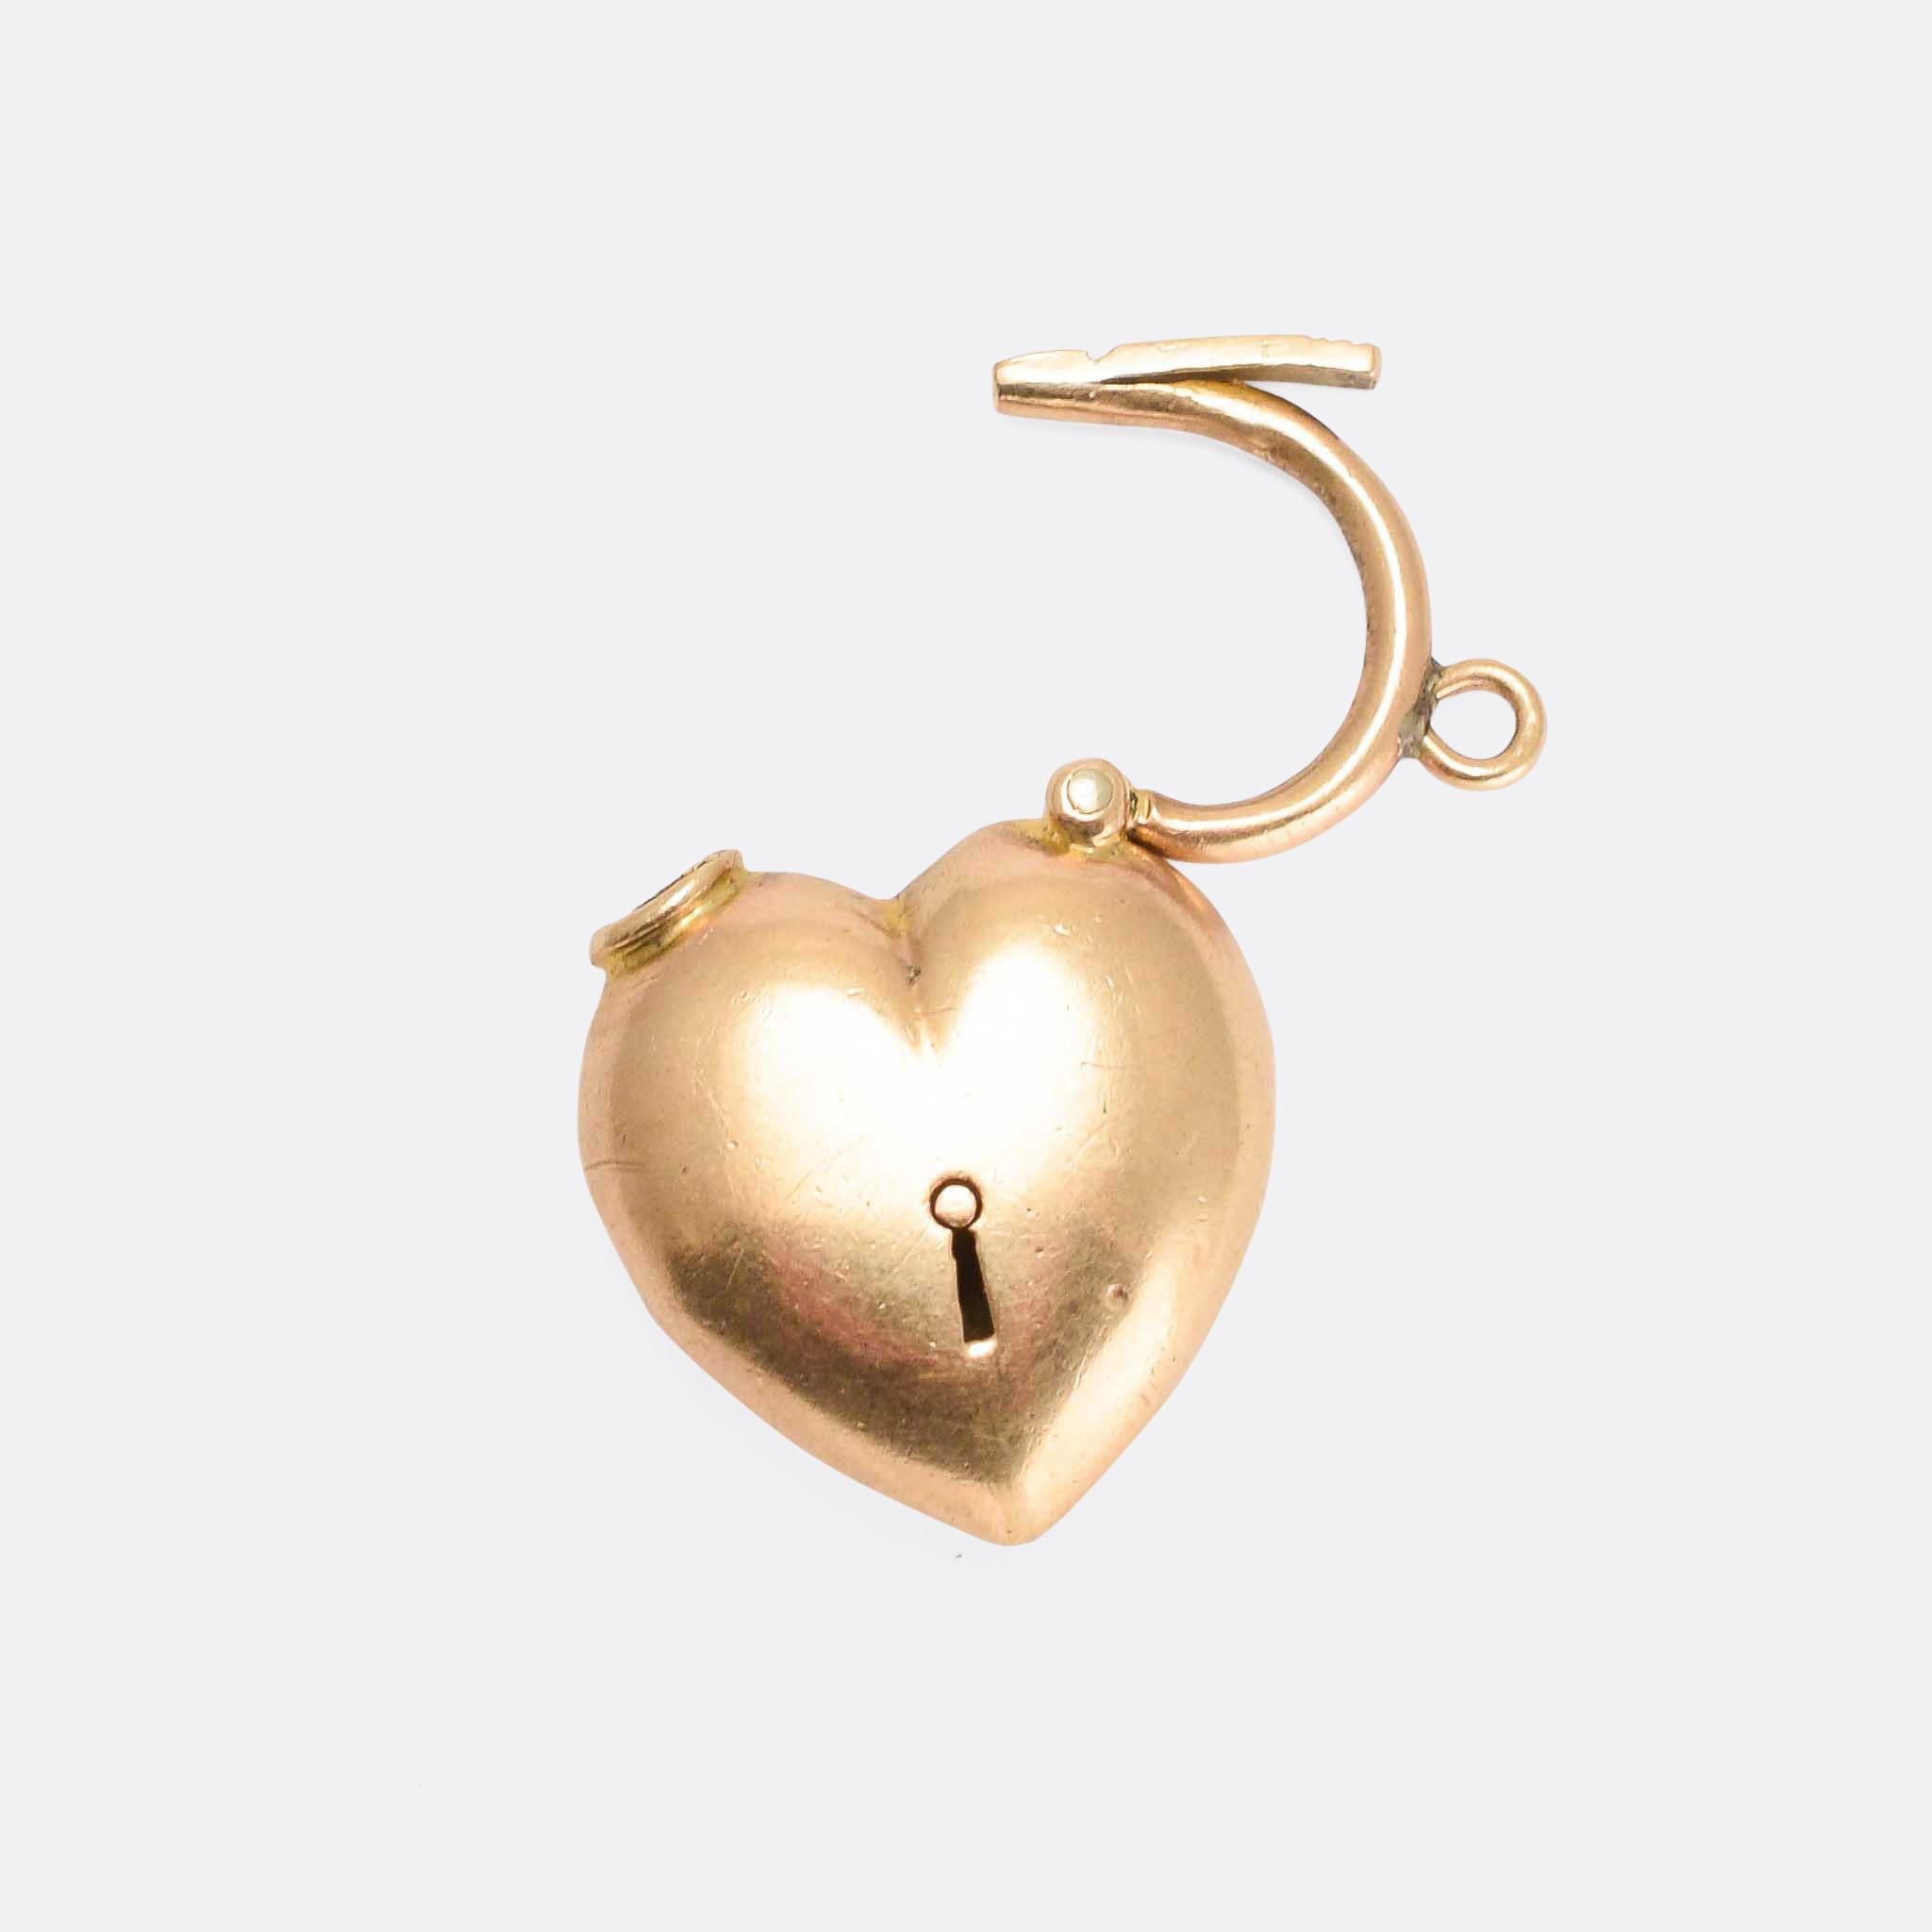 A fine Edwardian puffed heart padlock pendant modelled in 15 karat yellow gold. The top opens for easy attachment (it was likely intended to be worn as a bracelet clasp), and the frond features a keyhole.... suggesting the sentiment 